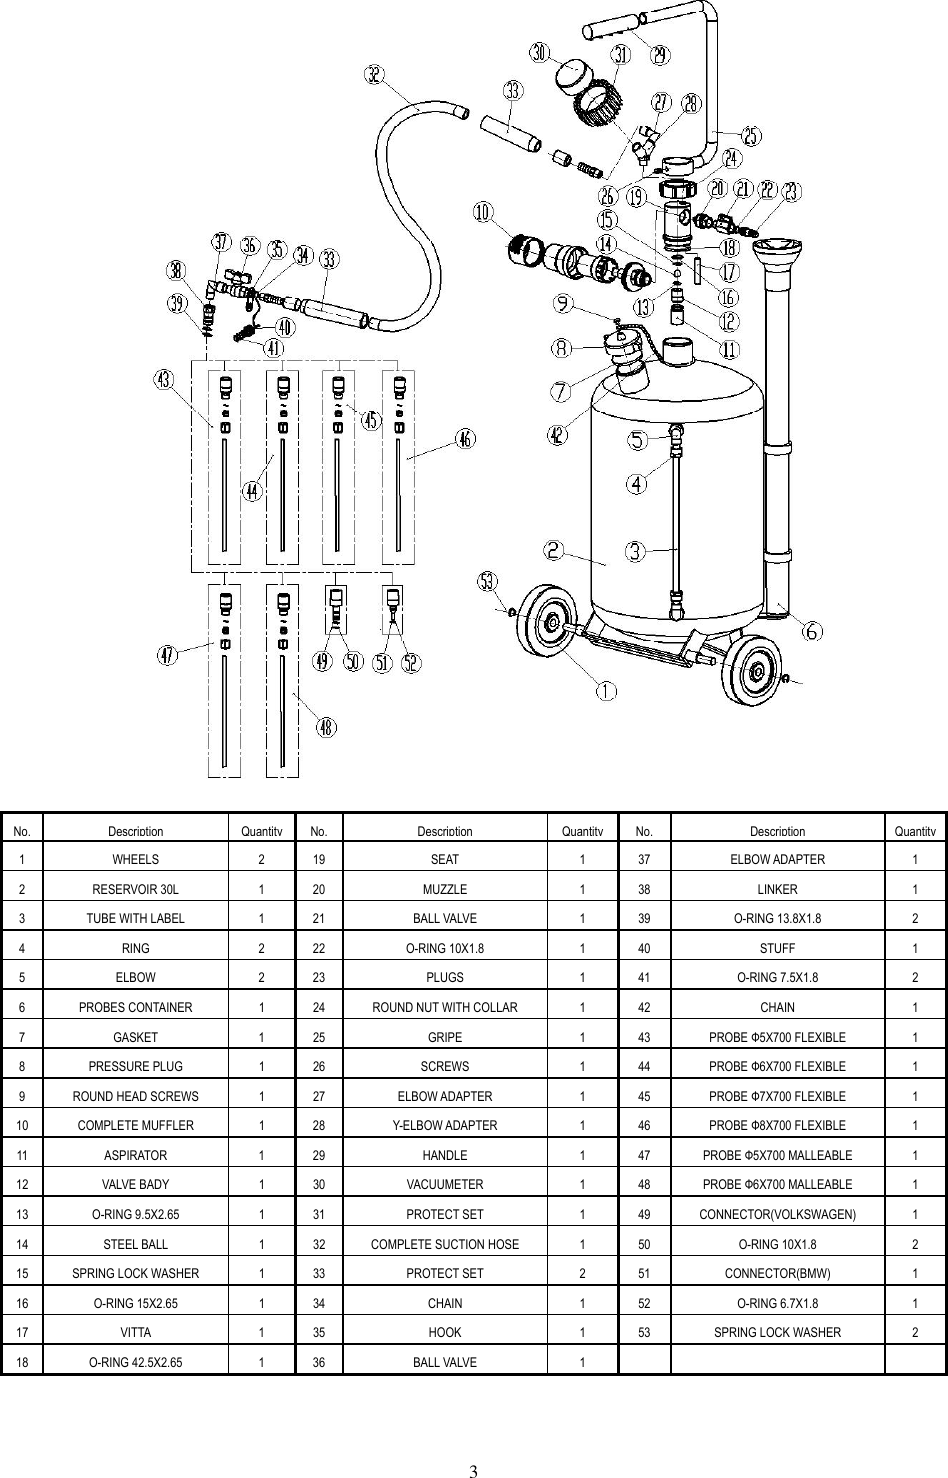 Page 4 of 4 - Northern-Industrial-Tools Northern-Industrial-Tools-109088-Users-Manual- WARNING  Northern-industrial-tools-109088-users-manual